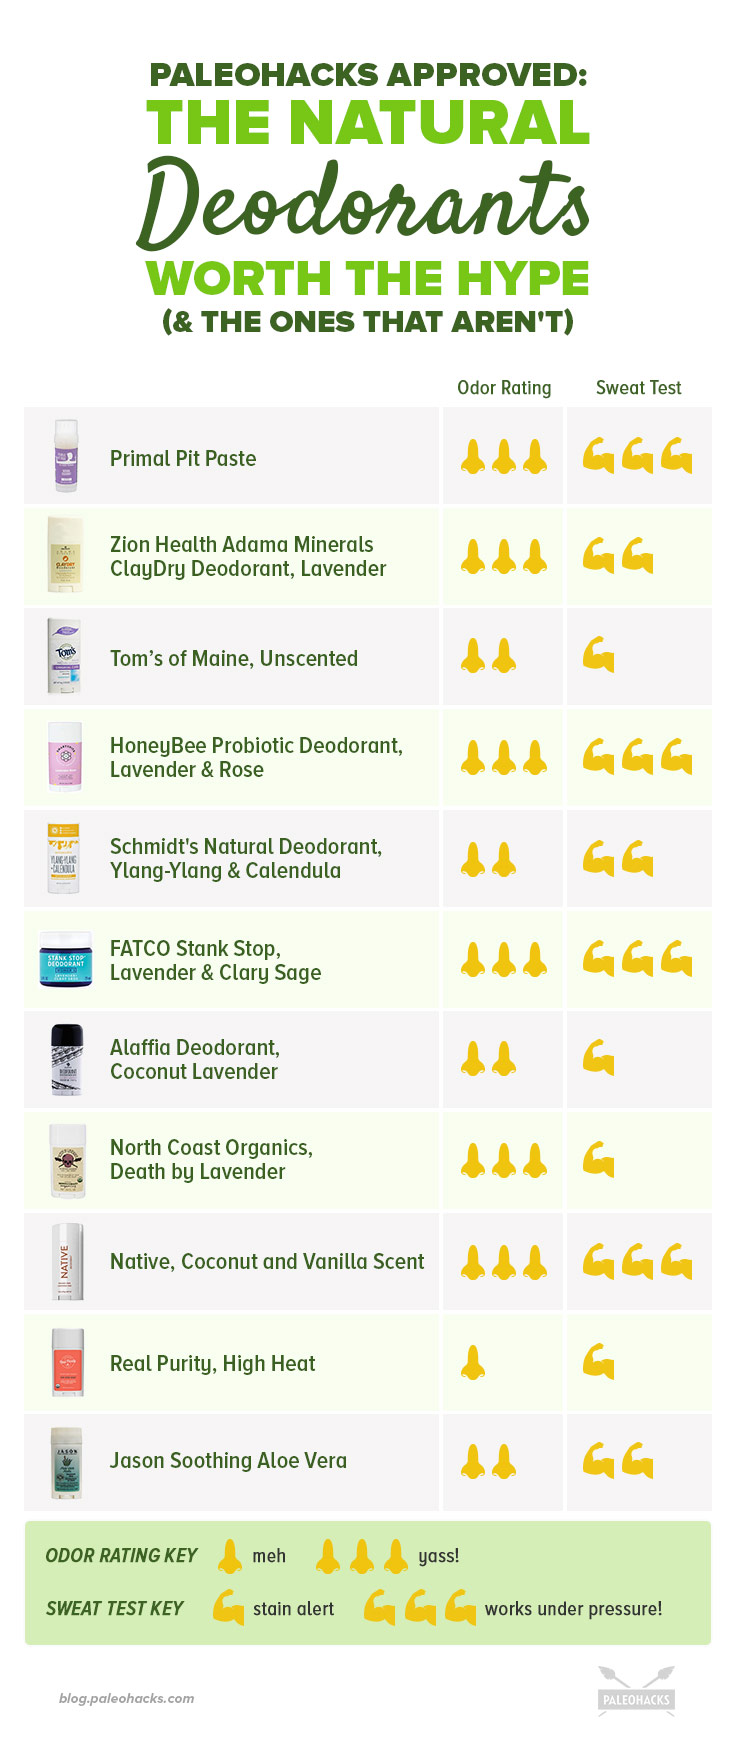 We rated each deodorant based on price, ingredients, odor protection, durability, ability to perform under pressure, and stick functionality.